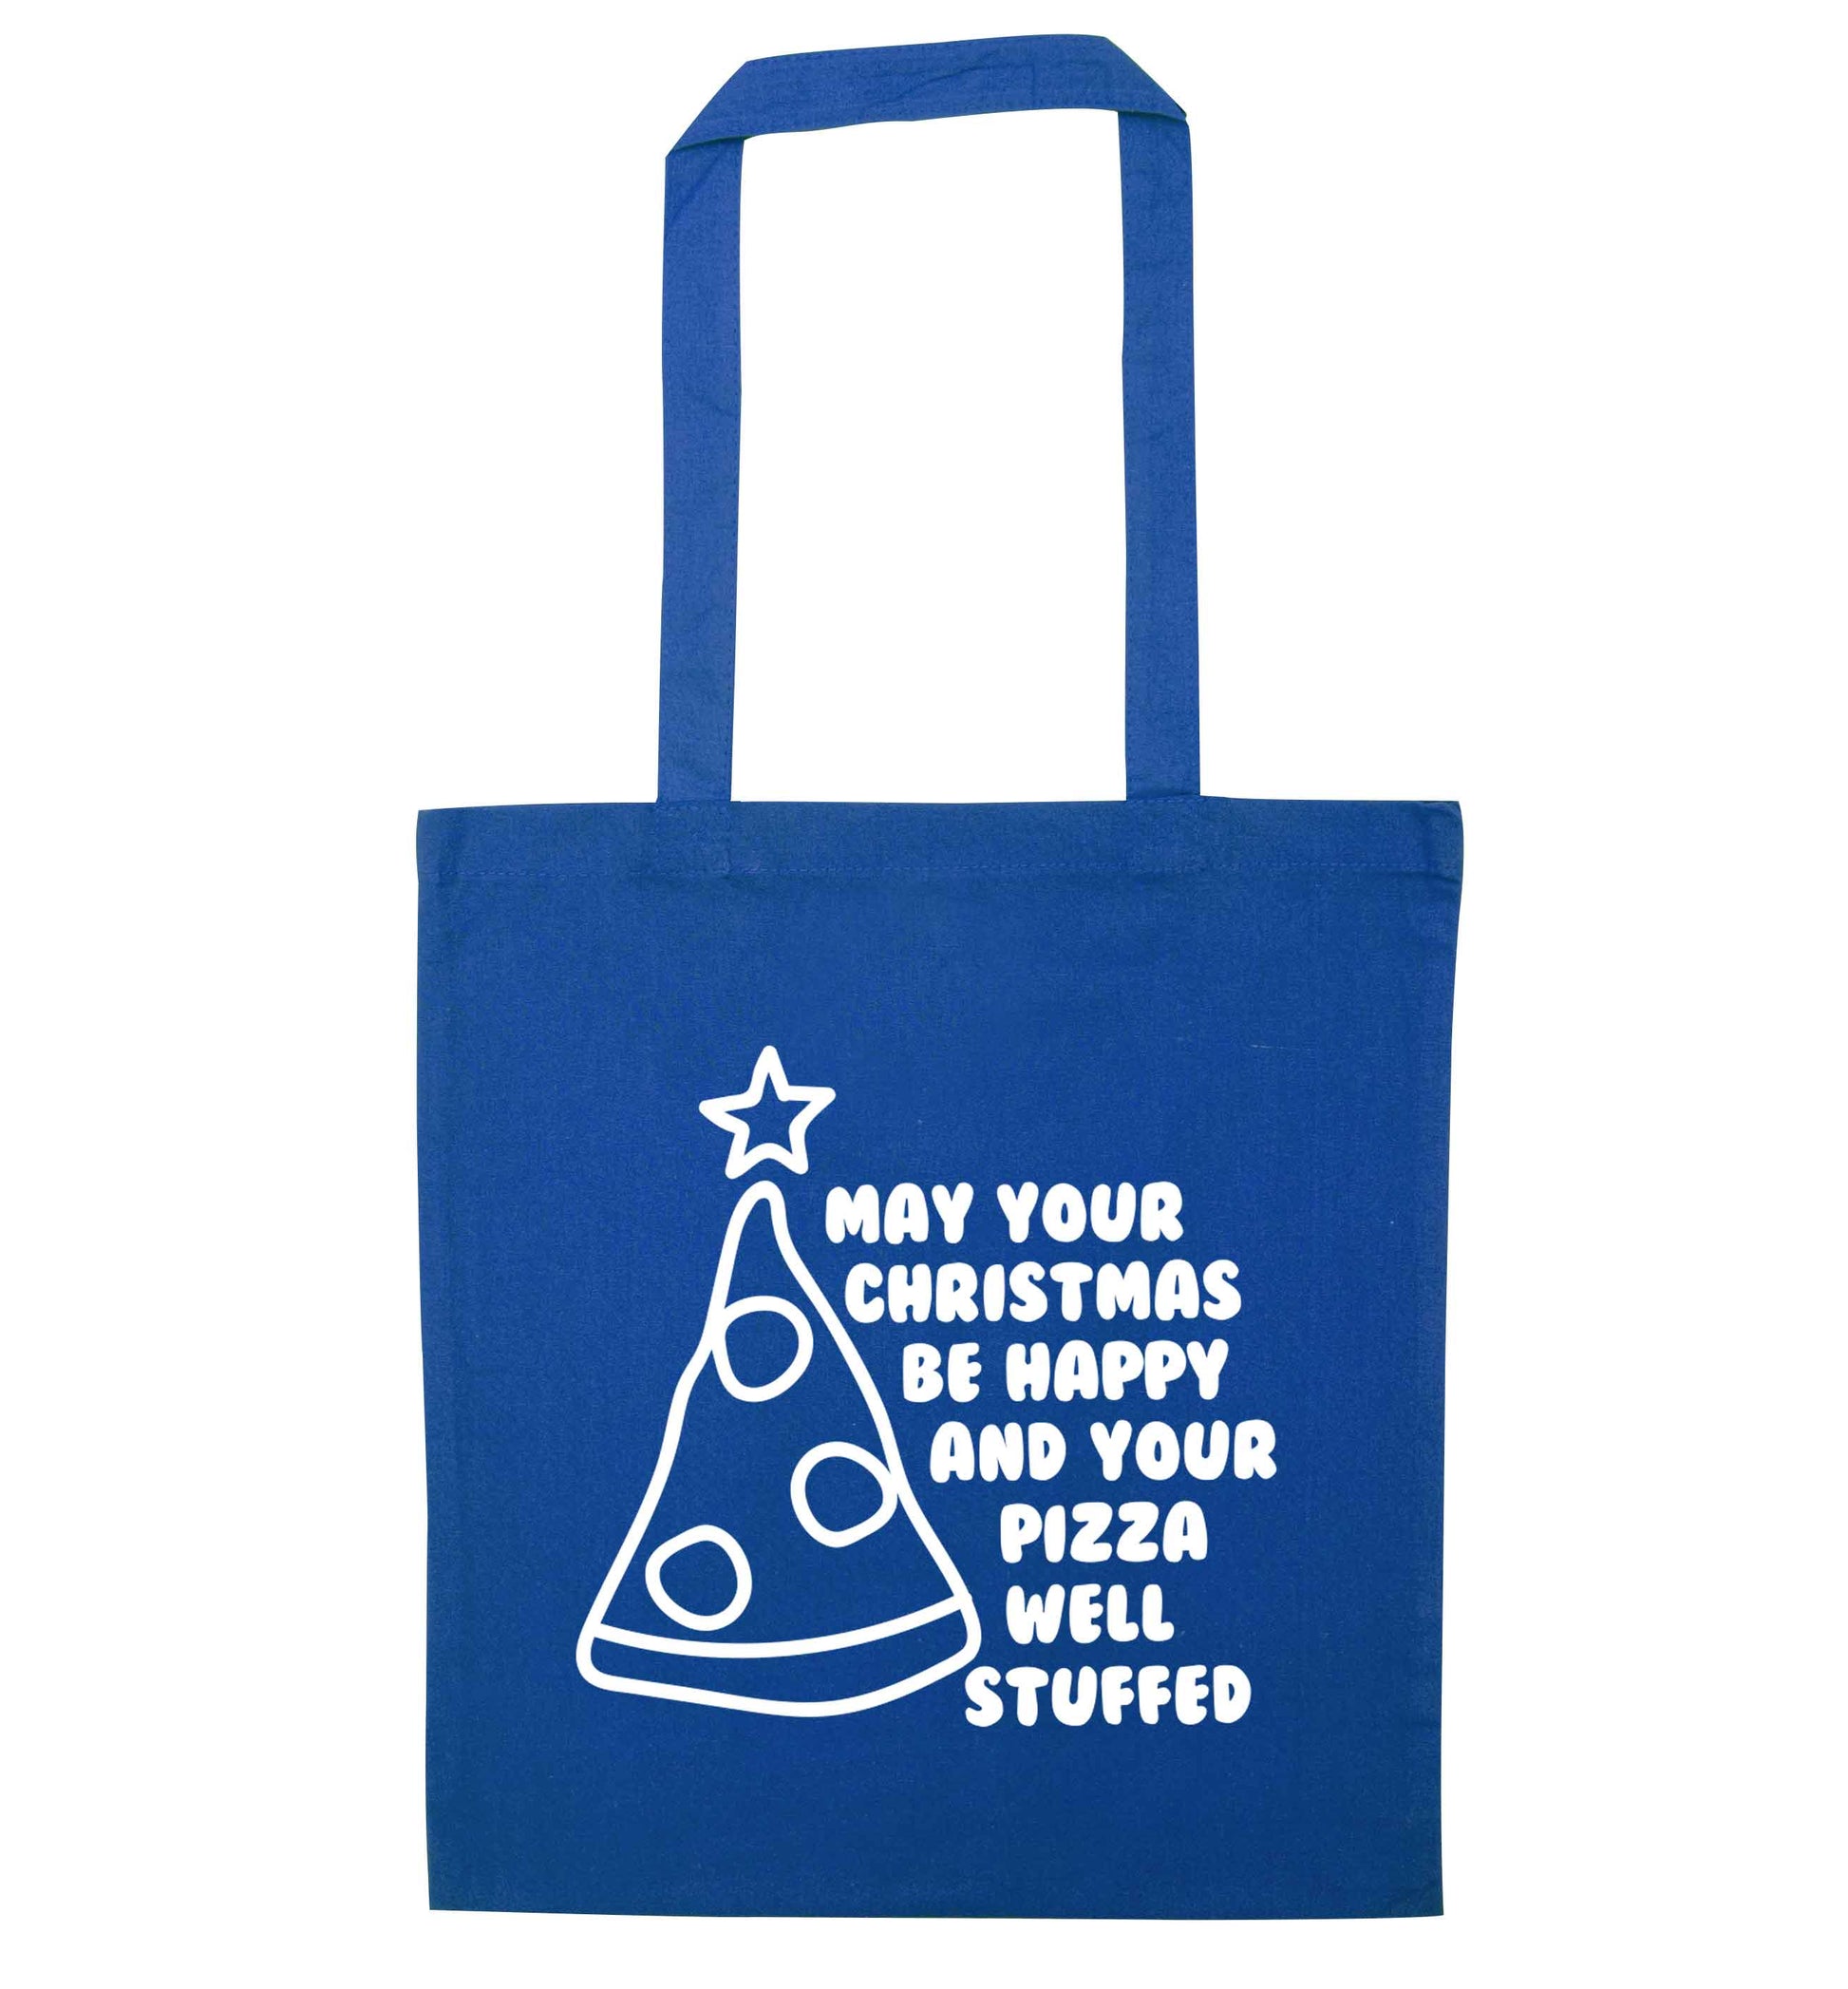 May your Christmas be happy and your pizza well stuffed blue tote bag